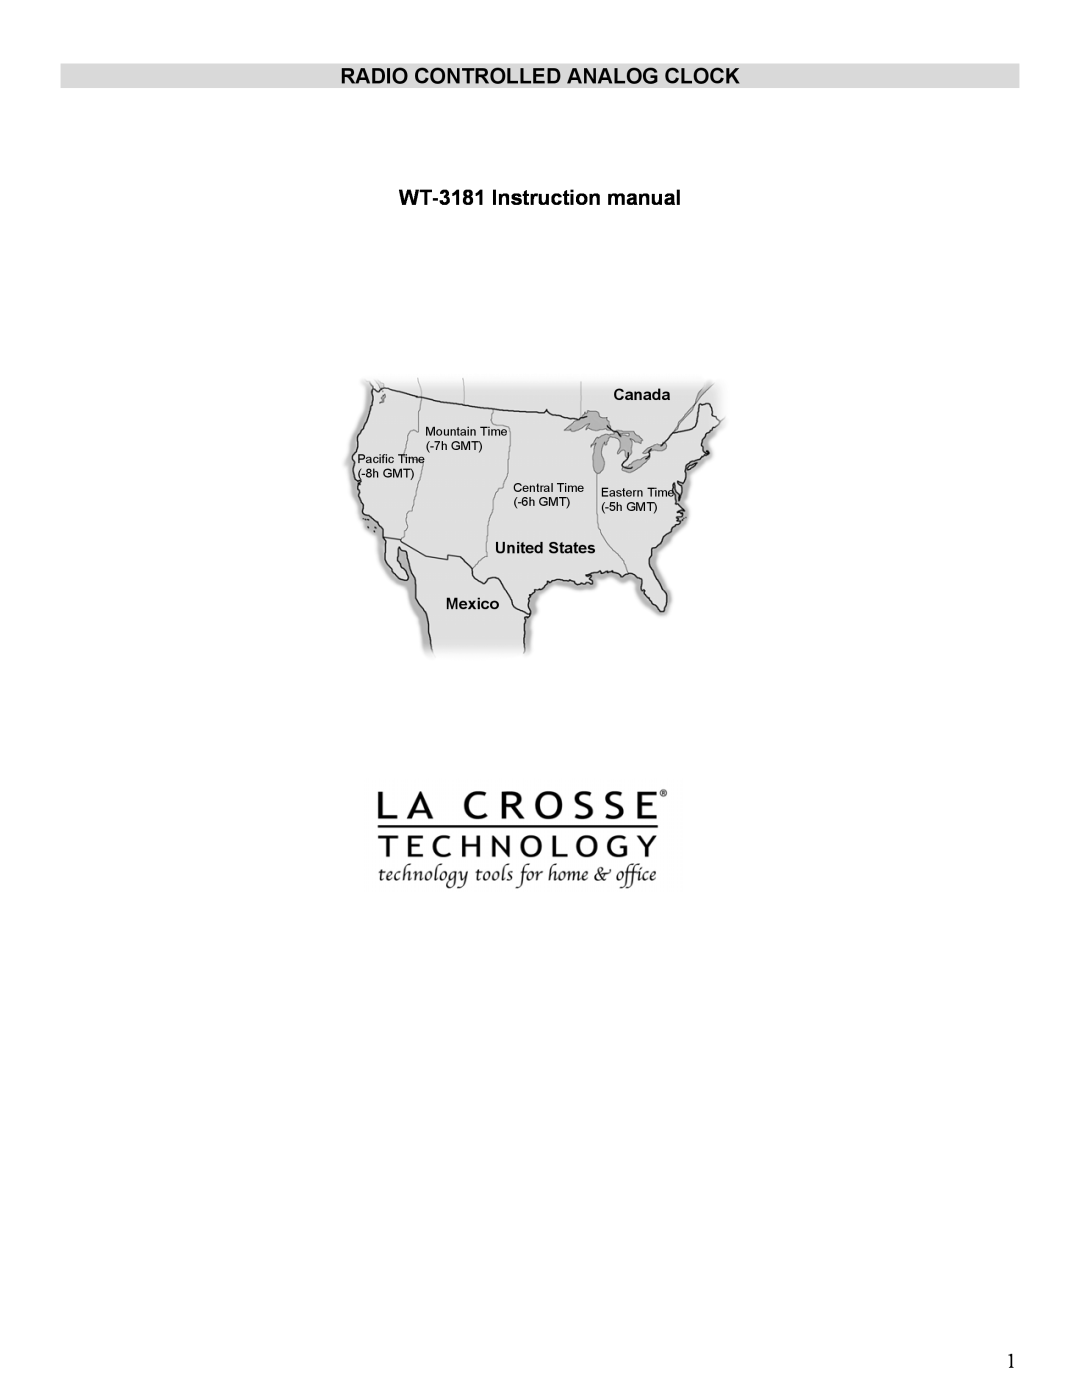 La Crosse Technology WT-3181 instruction manual Canada, United States Mexico, Mountain Time 7h GMT Pacific Time 8h GMT 